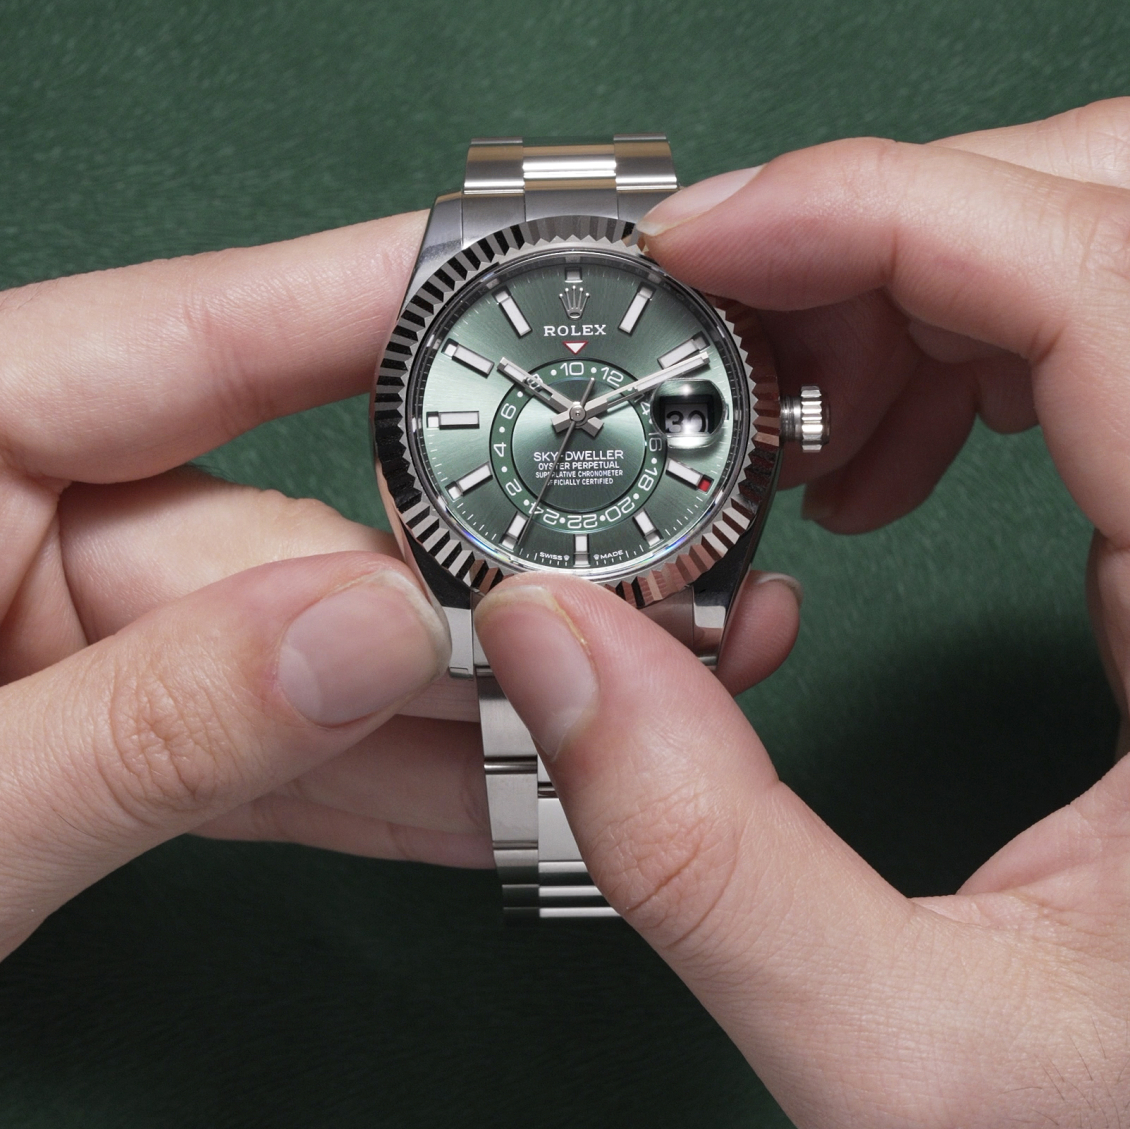 How to use the Rolex Sky-Dweller